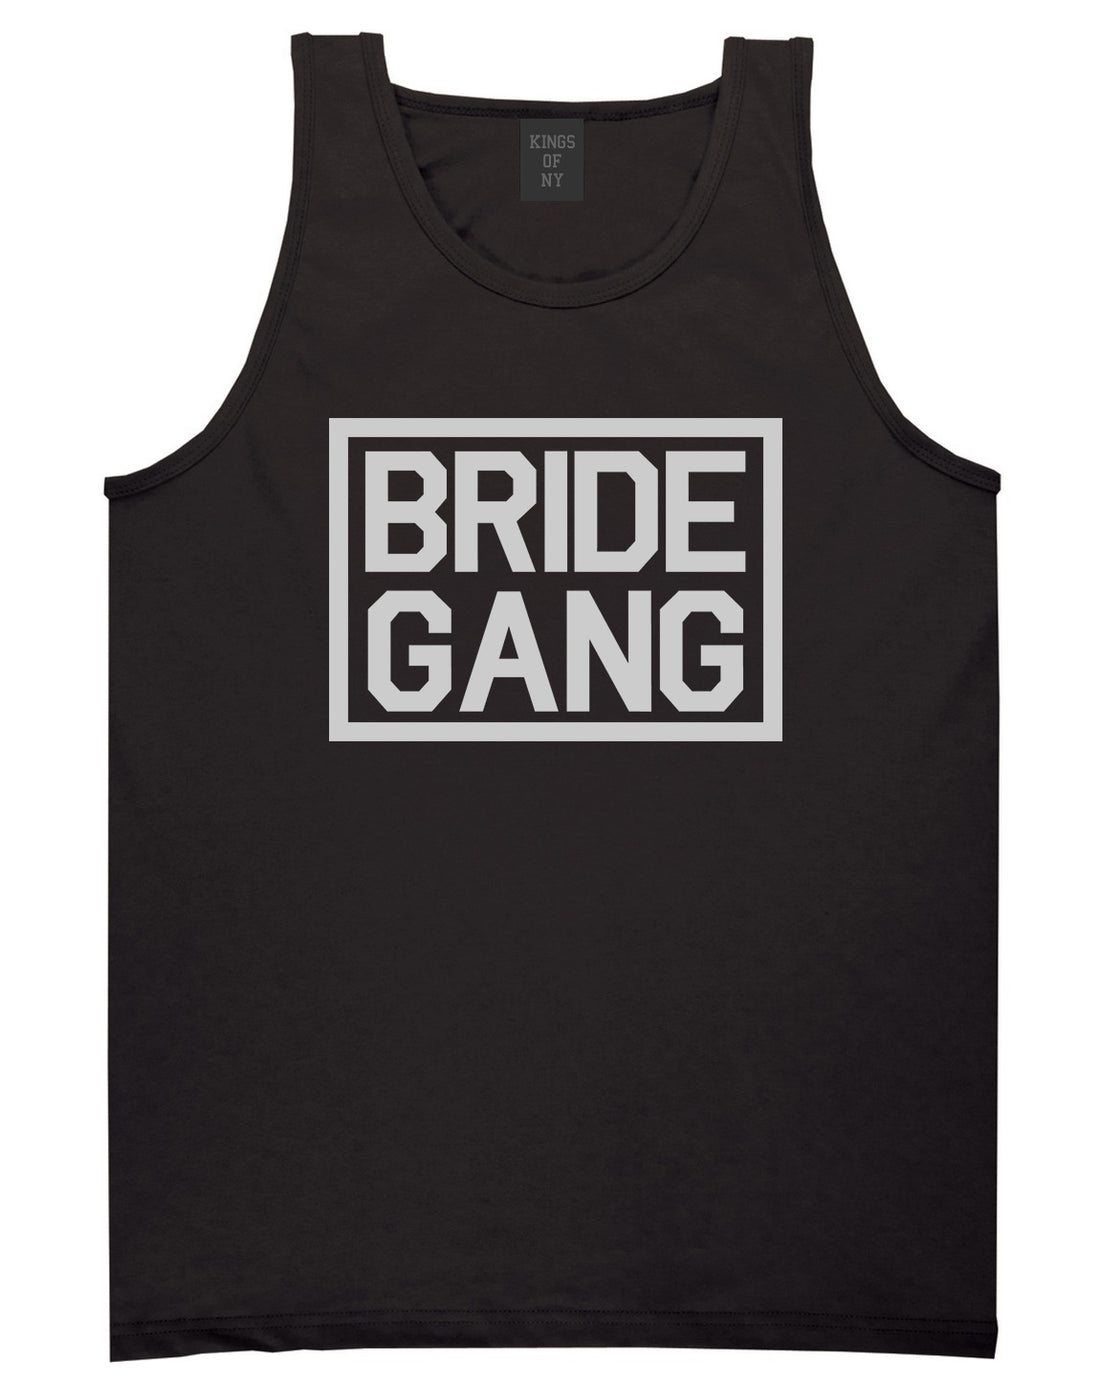 Bride Gang Bachlorette Party Black Tank Top Shirt by Kings Of NY